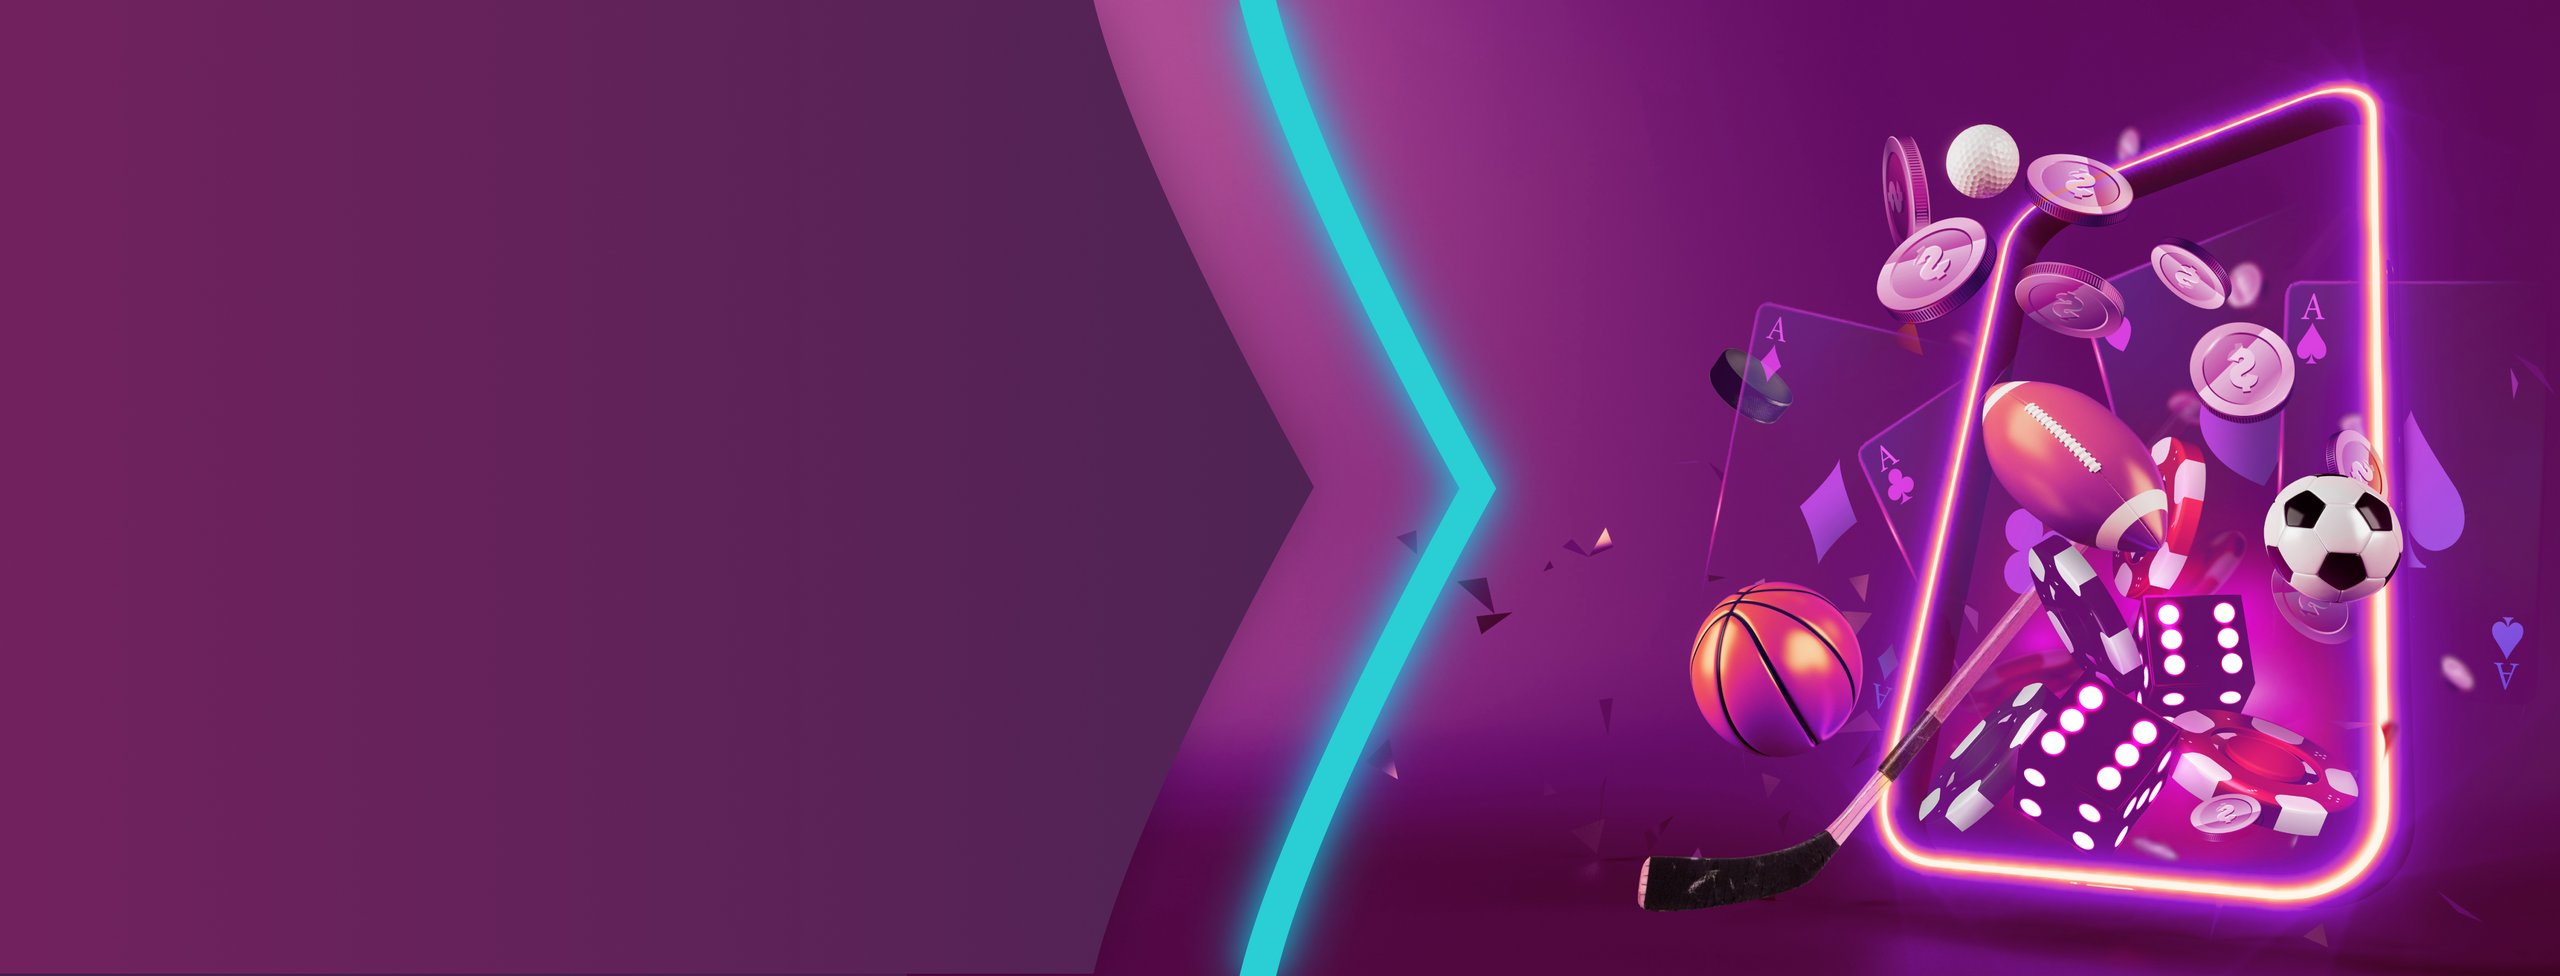 Purple background with different sports balls, coins and dice